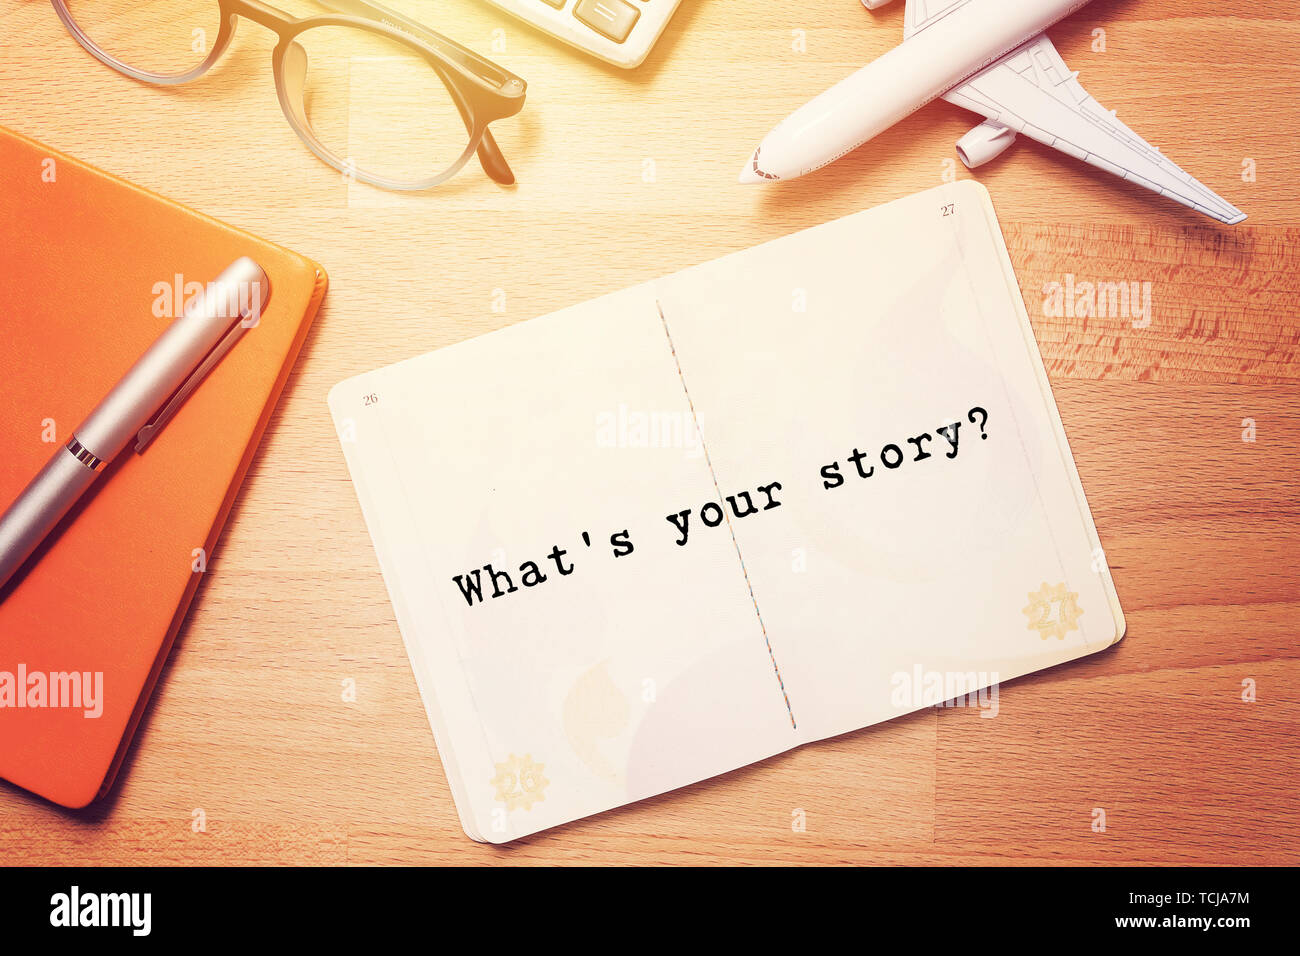 what's your story? notebook with text at blank page on wooden background with glasses and plane model Stock Photo